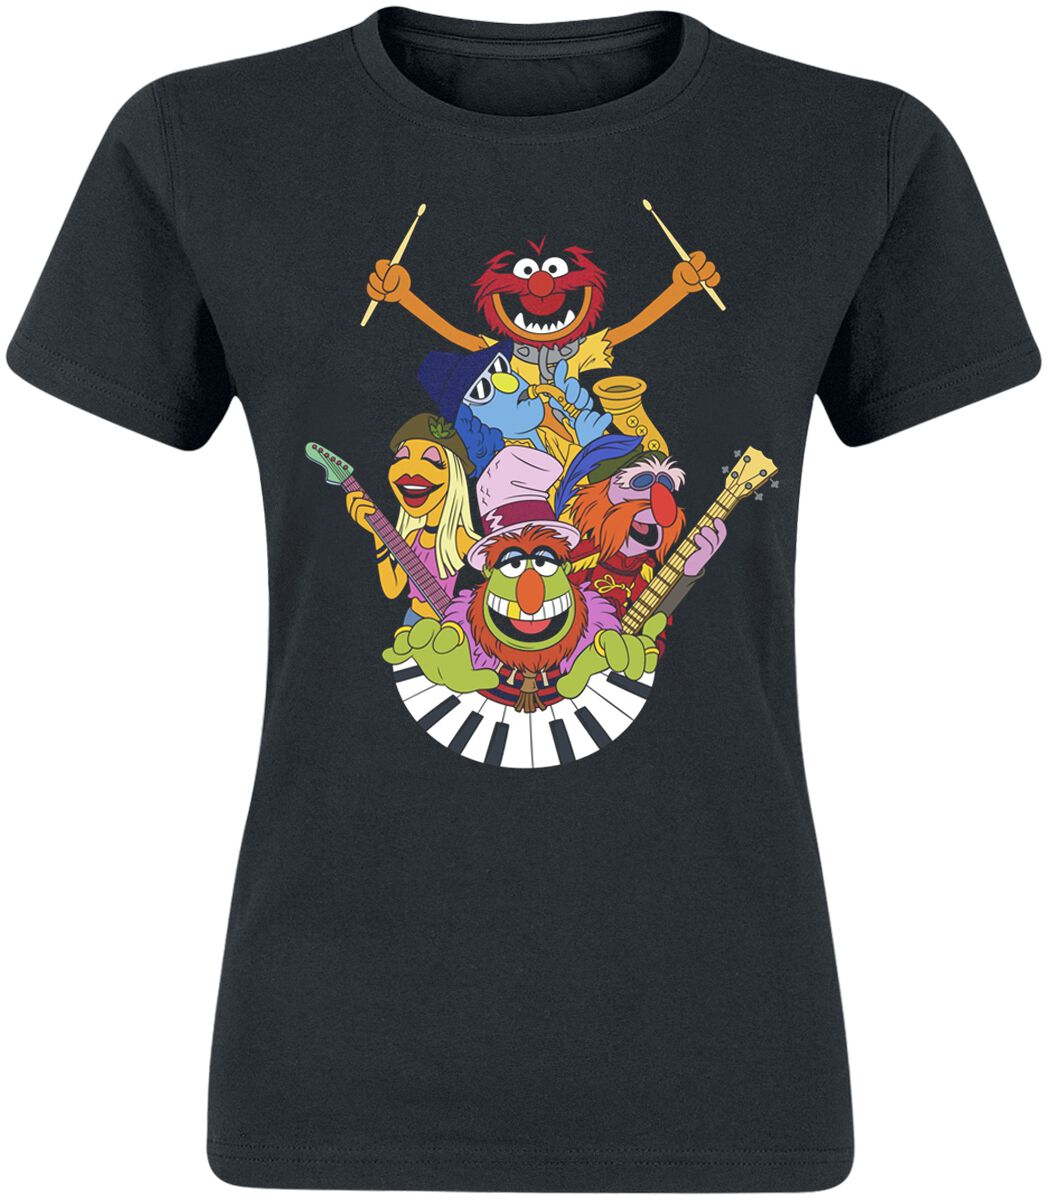 The Muppets Dr. Teeth and The Electric Mayhem T-Shirt black